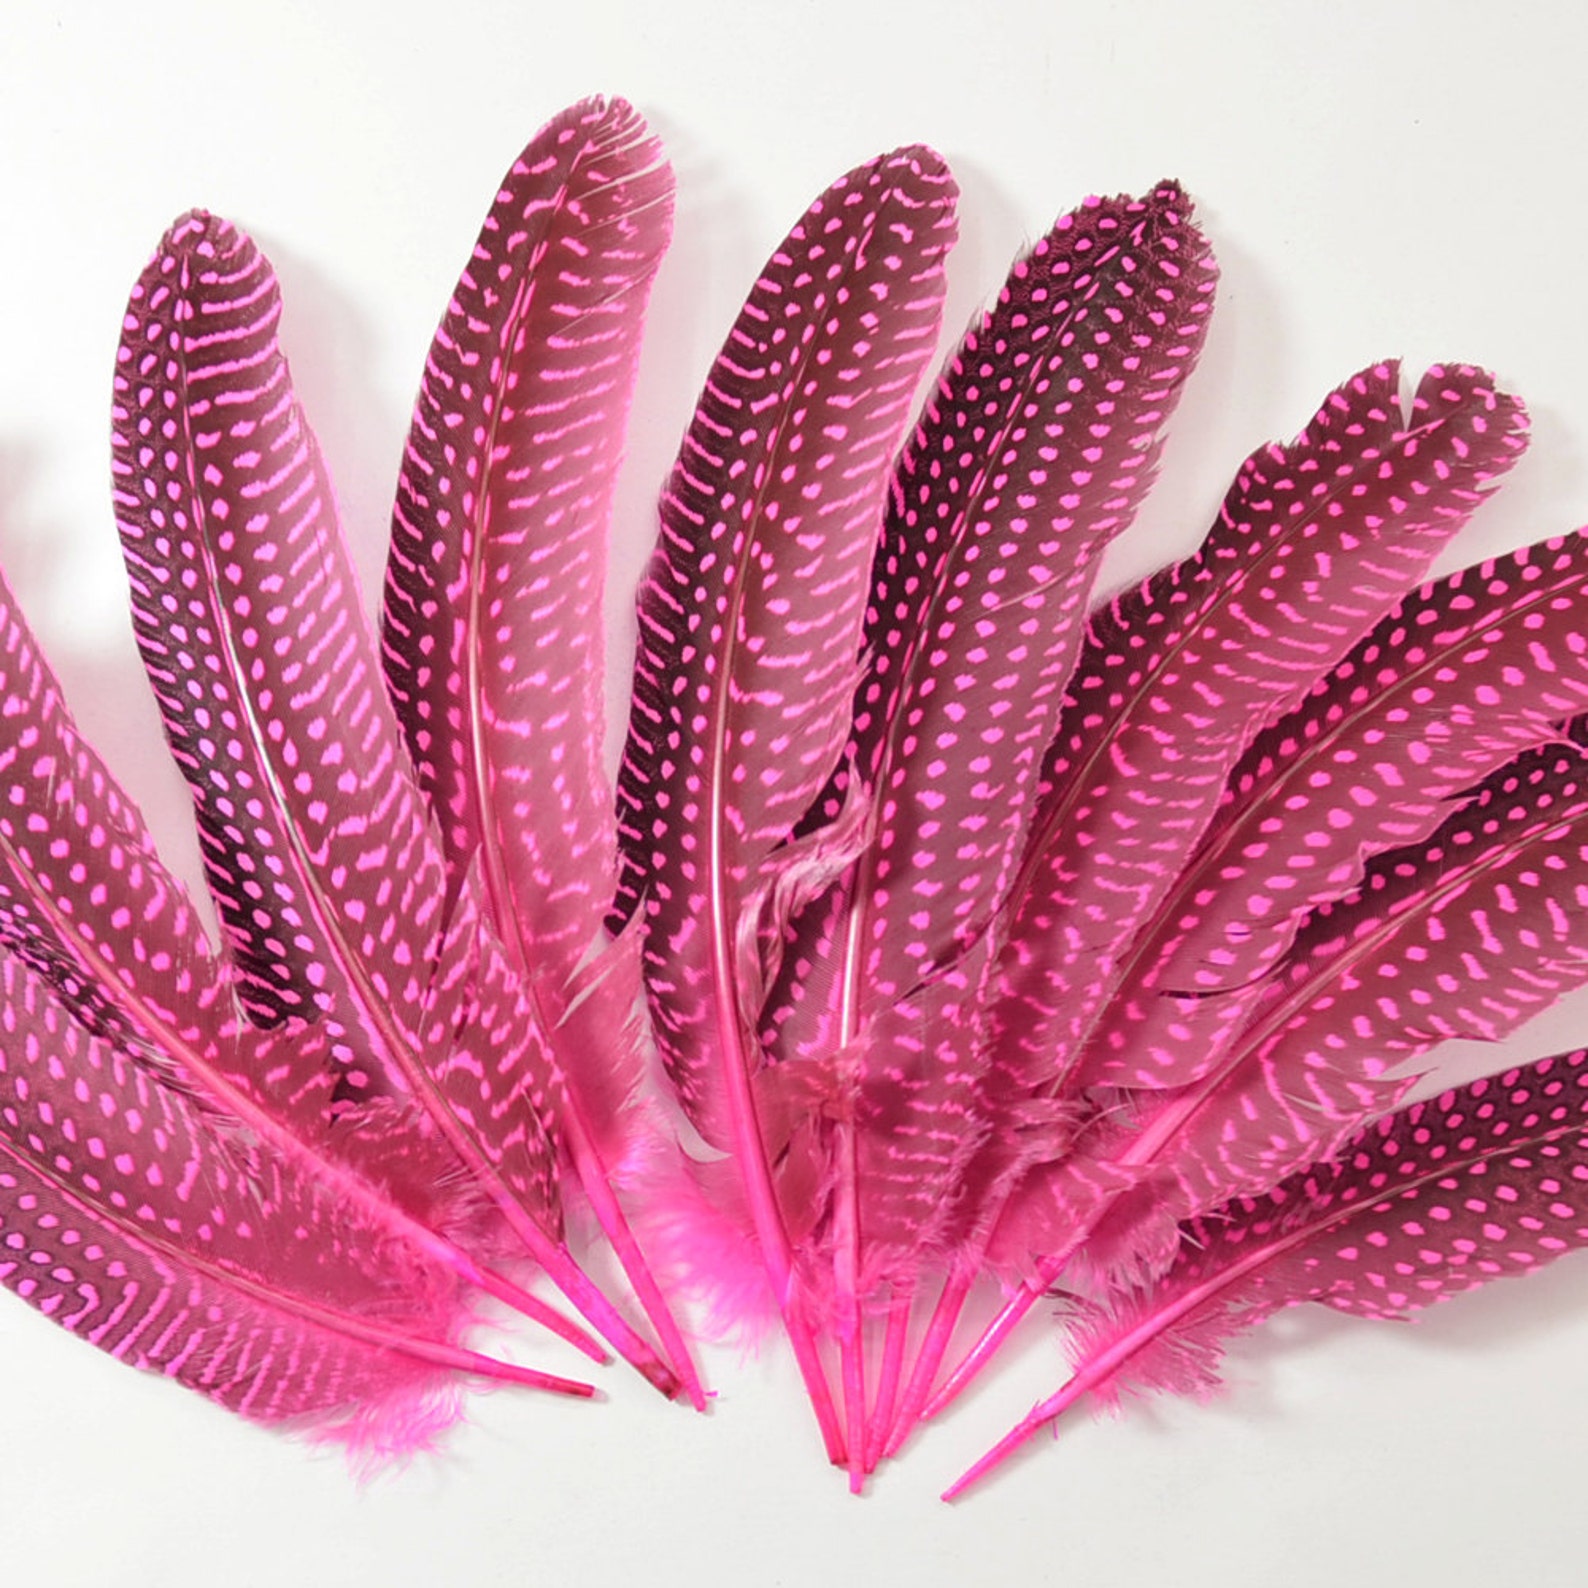 10pcs Guinea Fowl Quill Feathers Polkadot Feathers Pink | Etsy